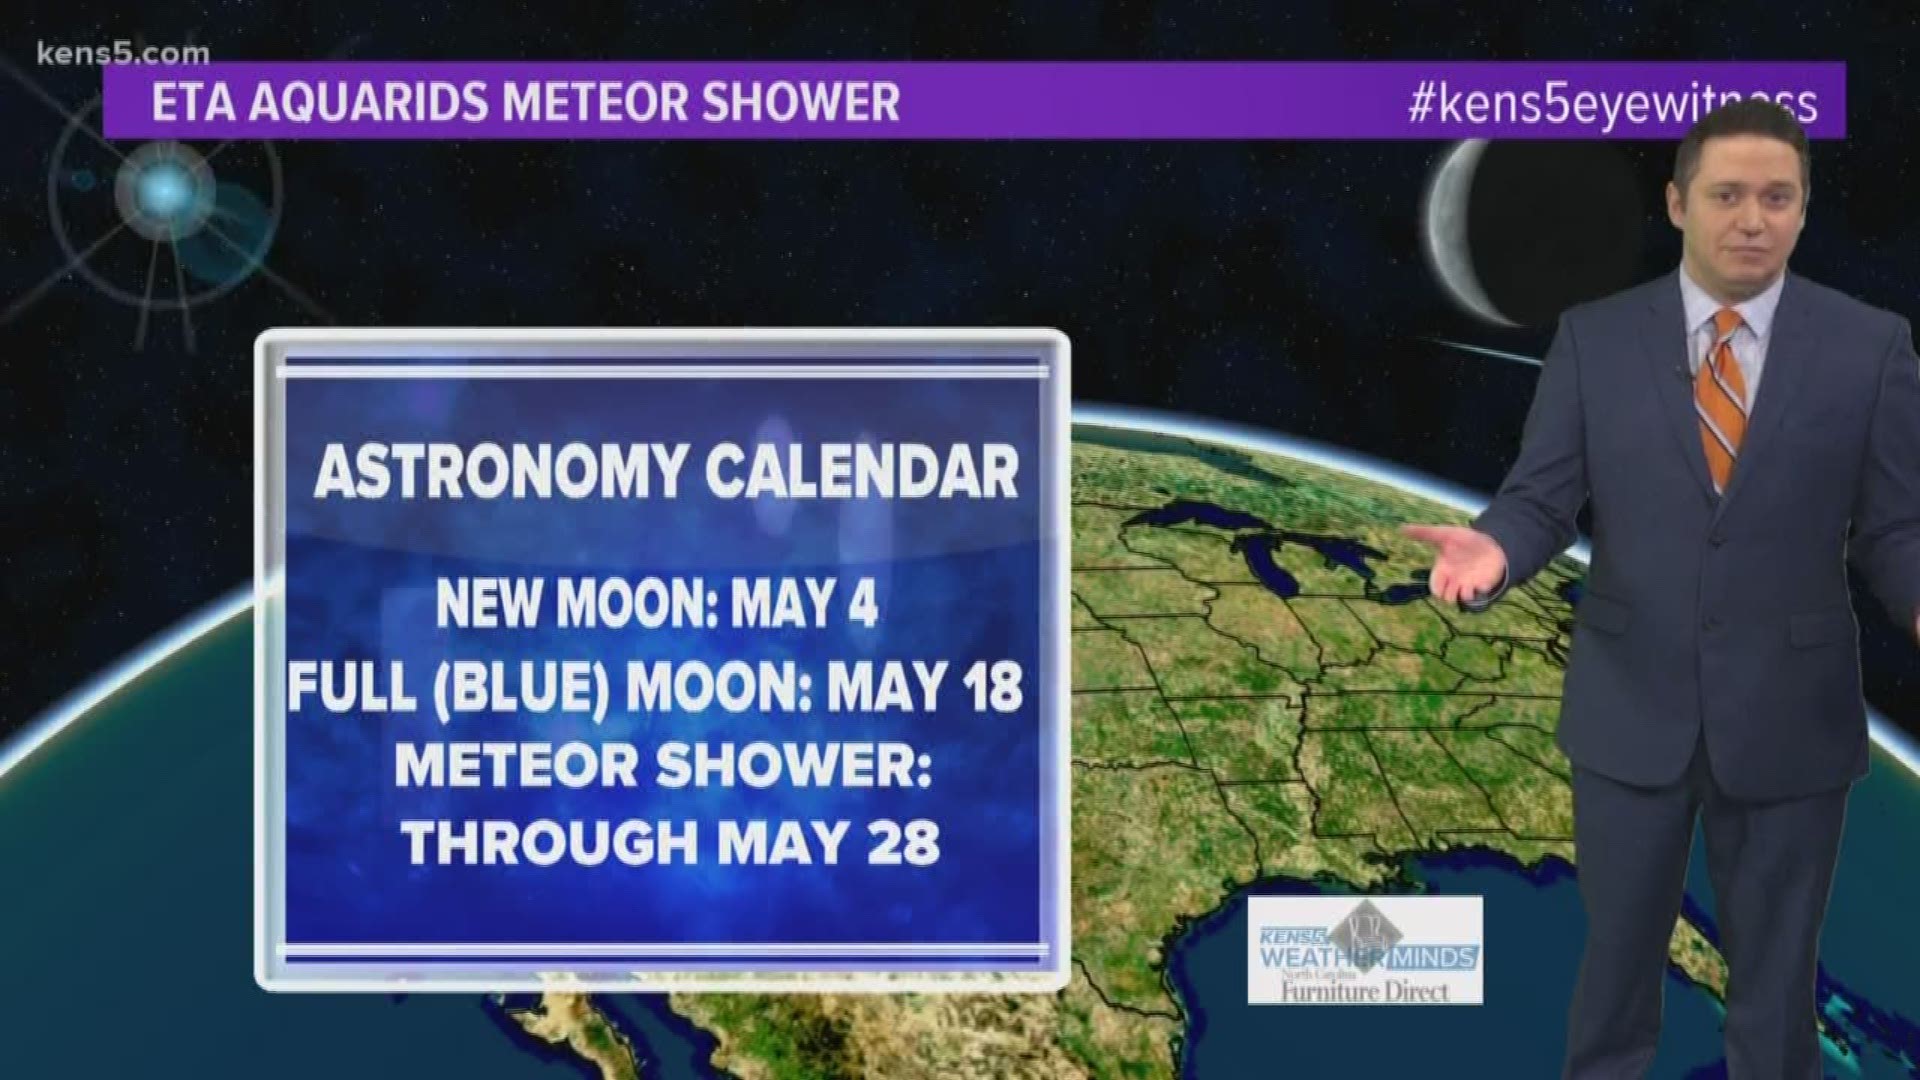 This month will offer up more than just one rare weather phenomena for stargazers to observe.